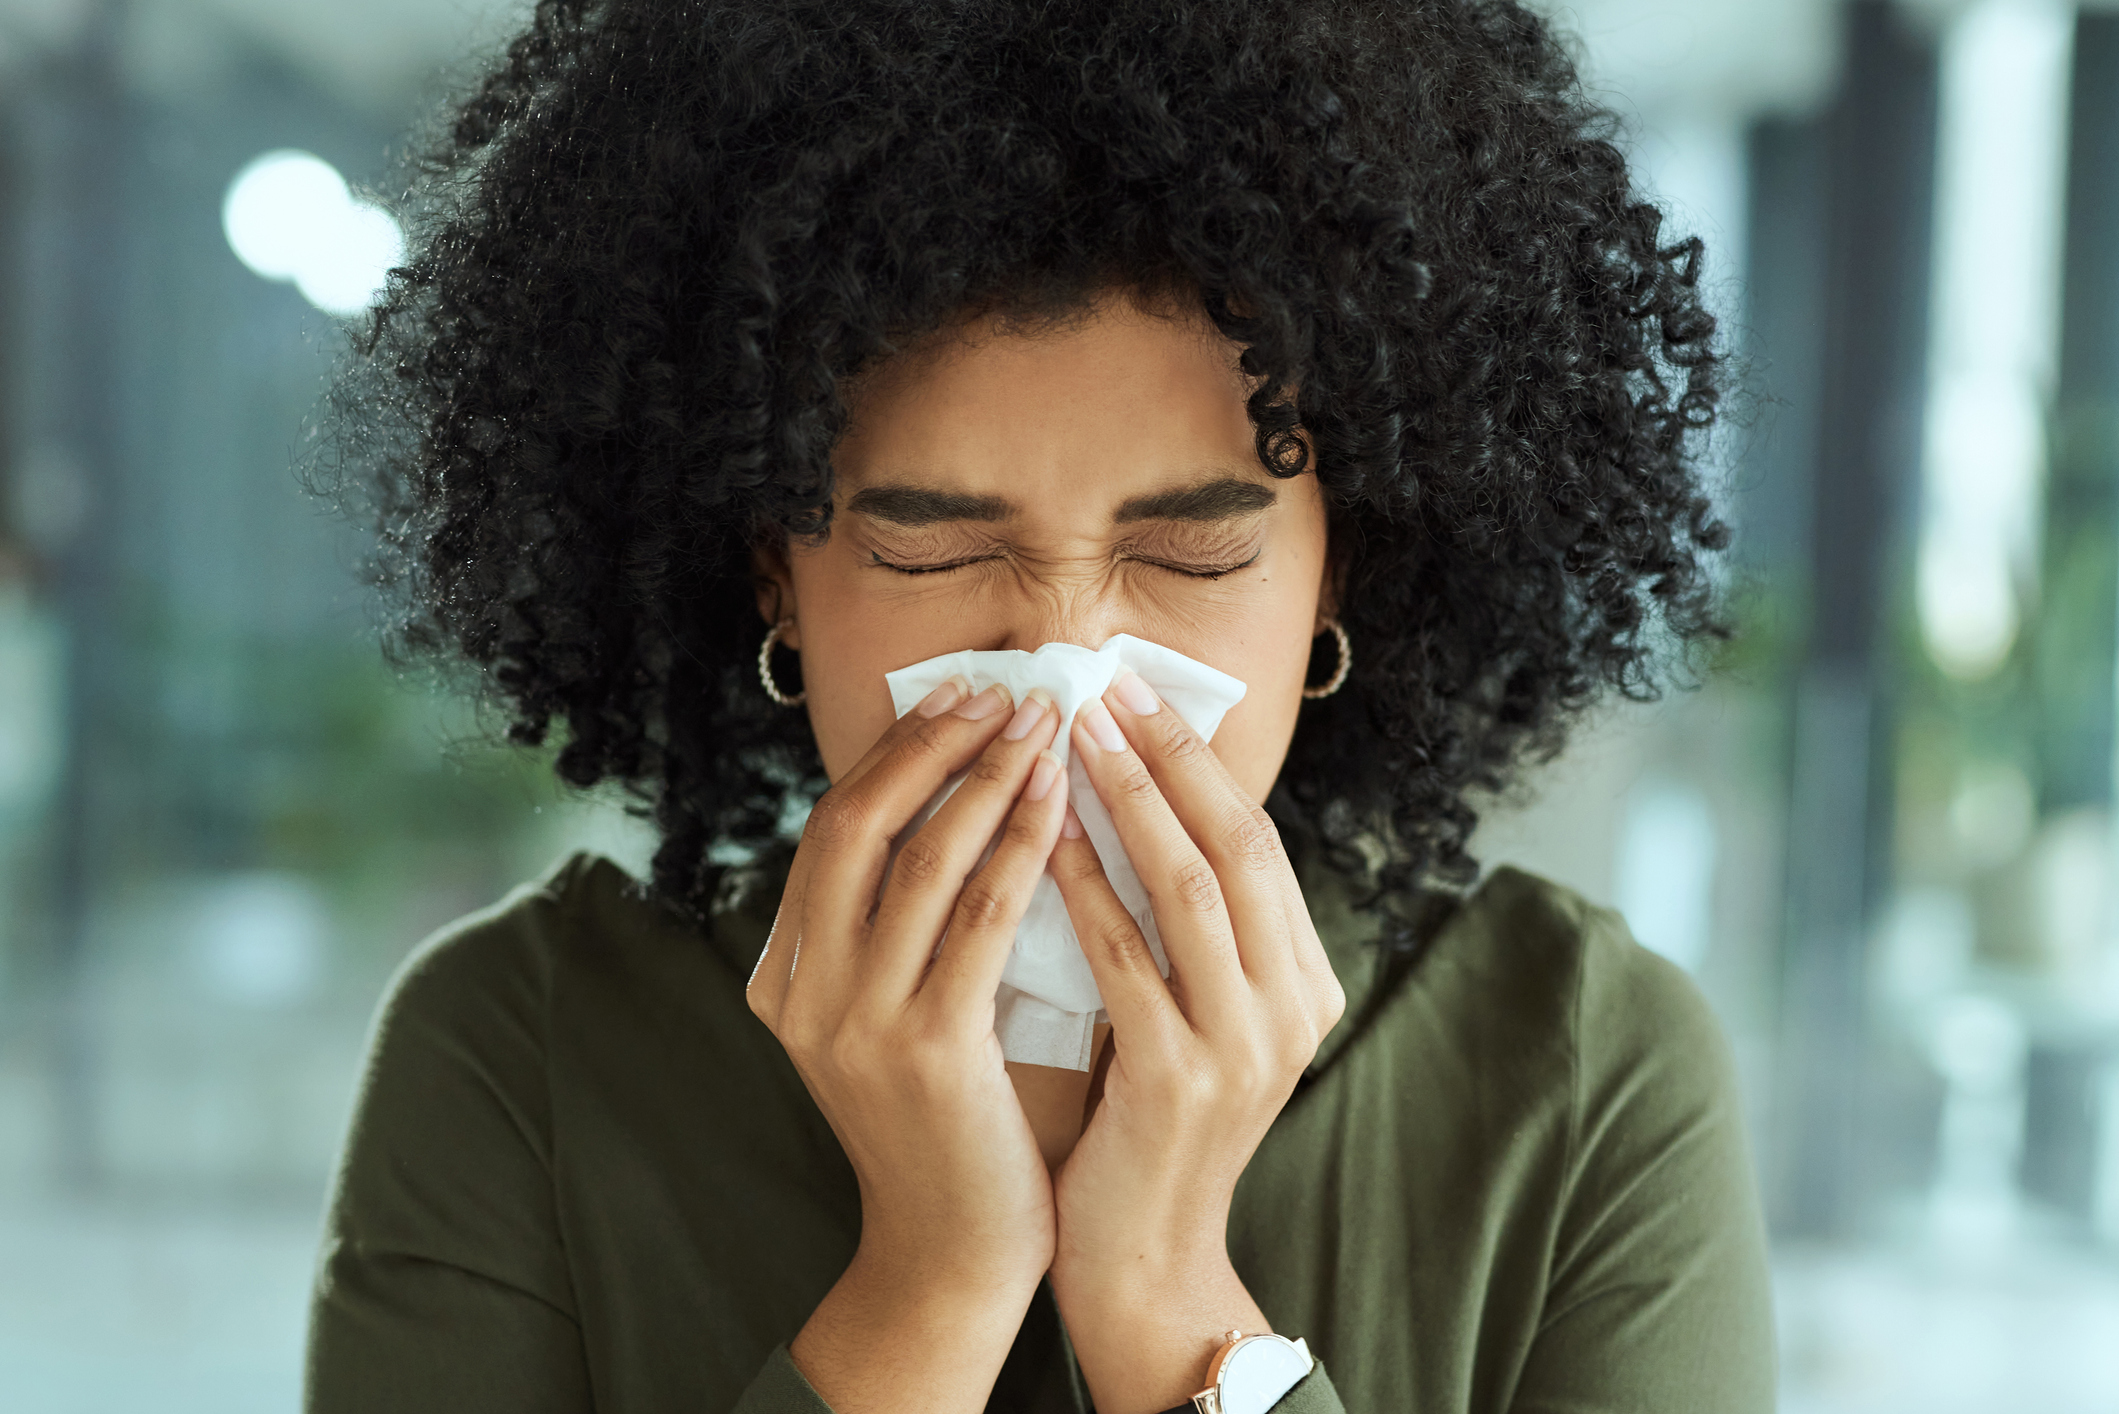 How MVHR can help allergy sufferers